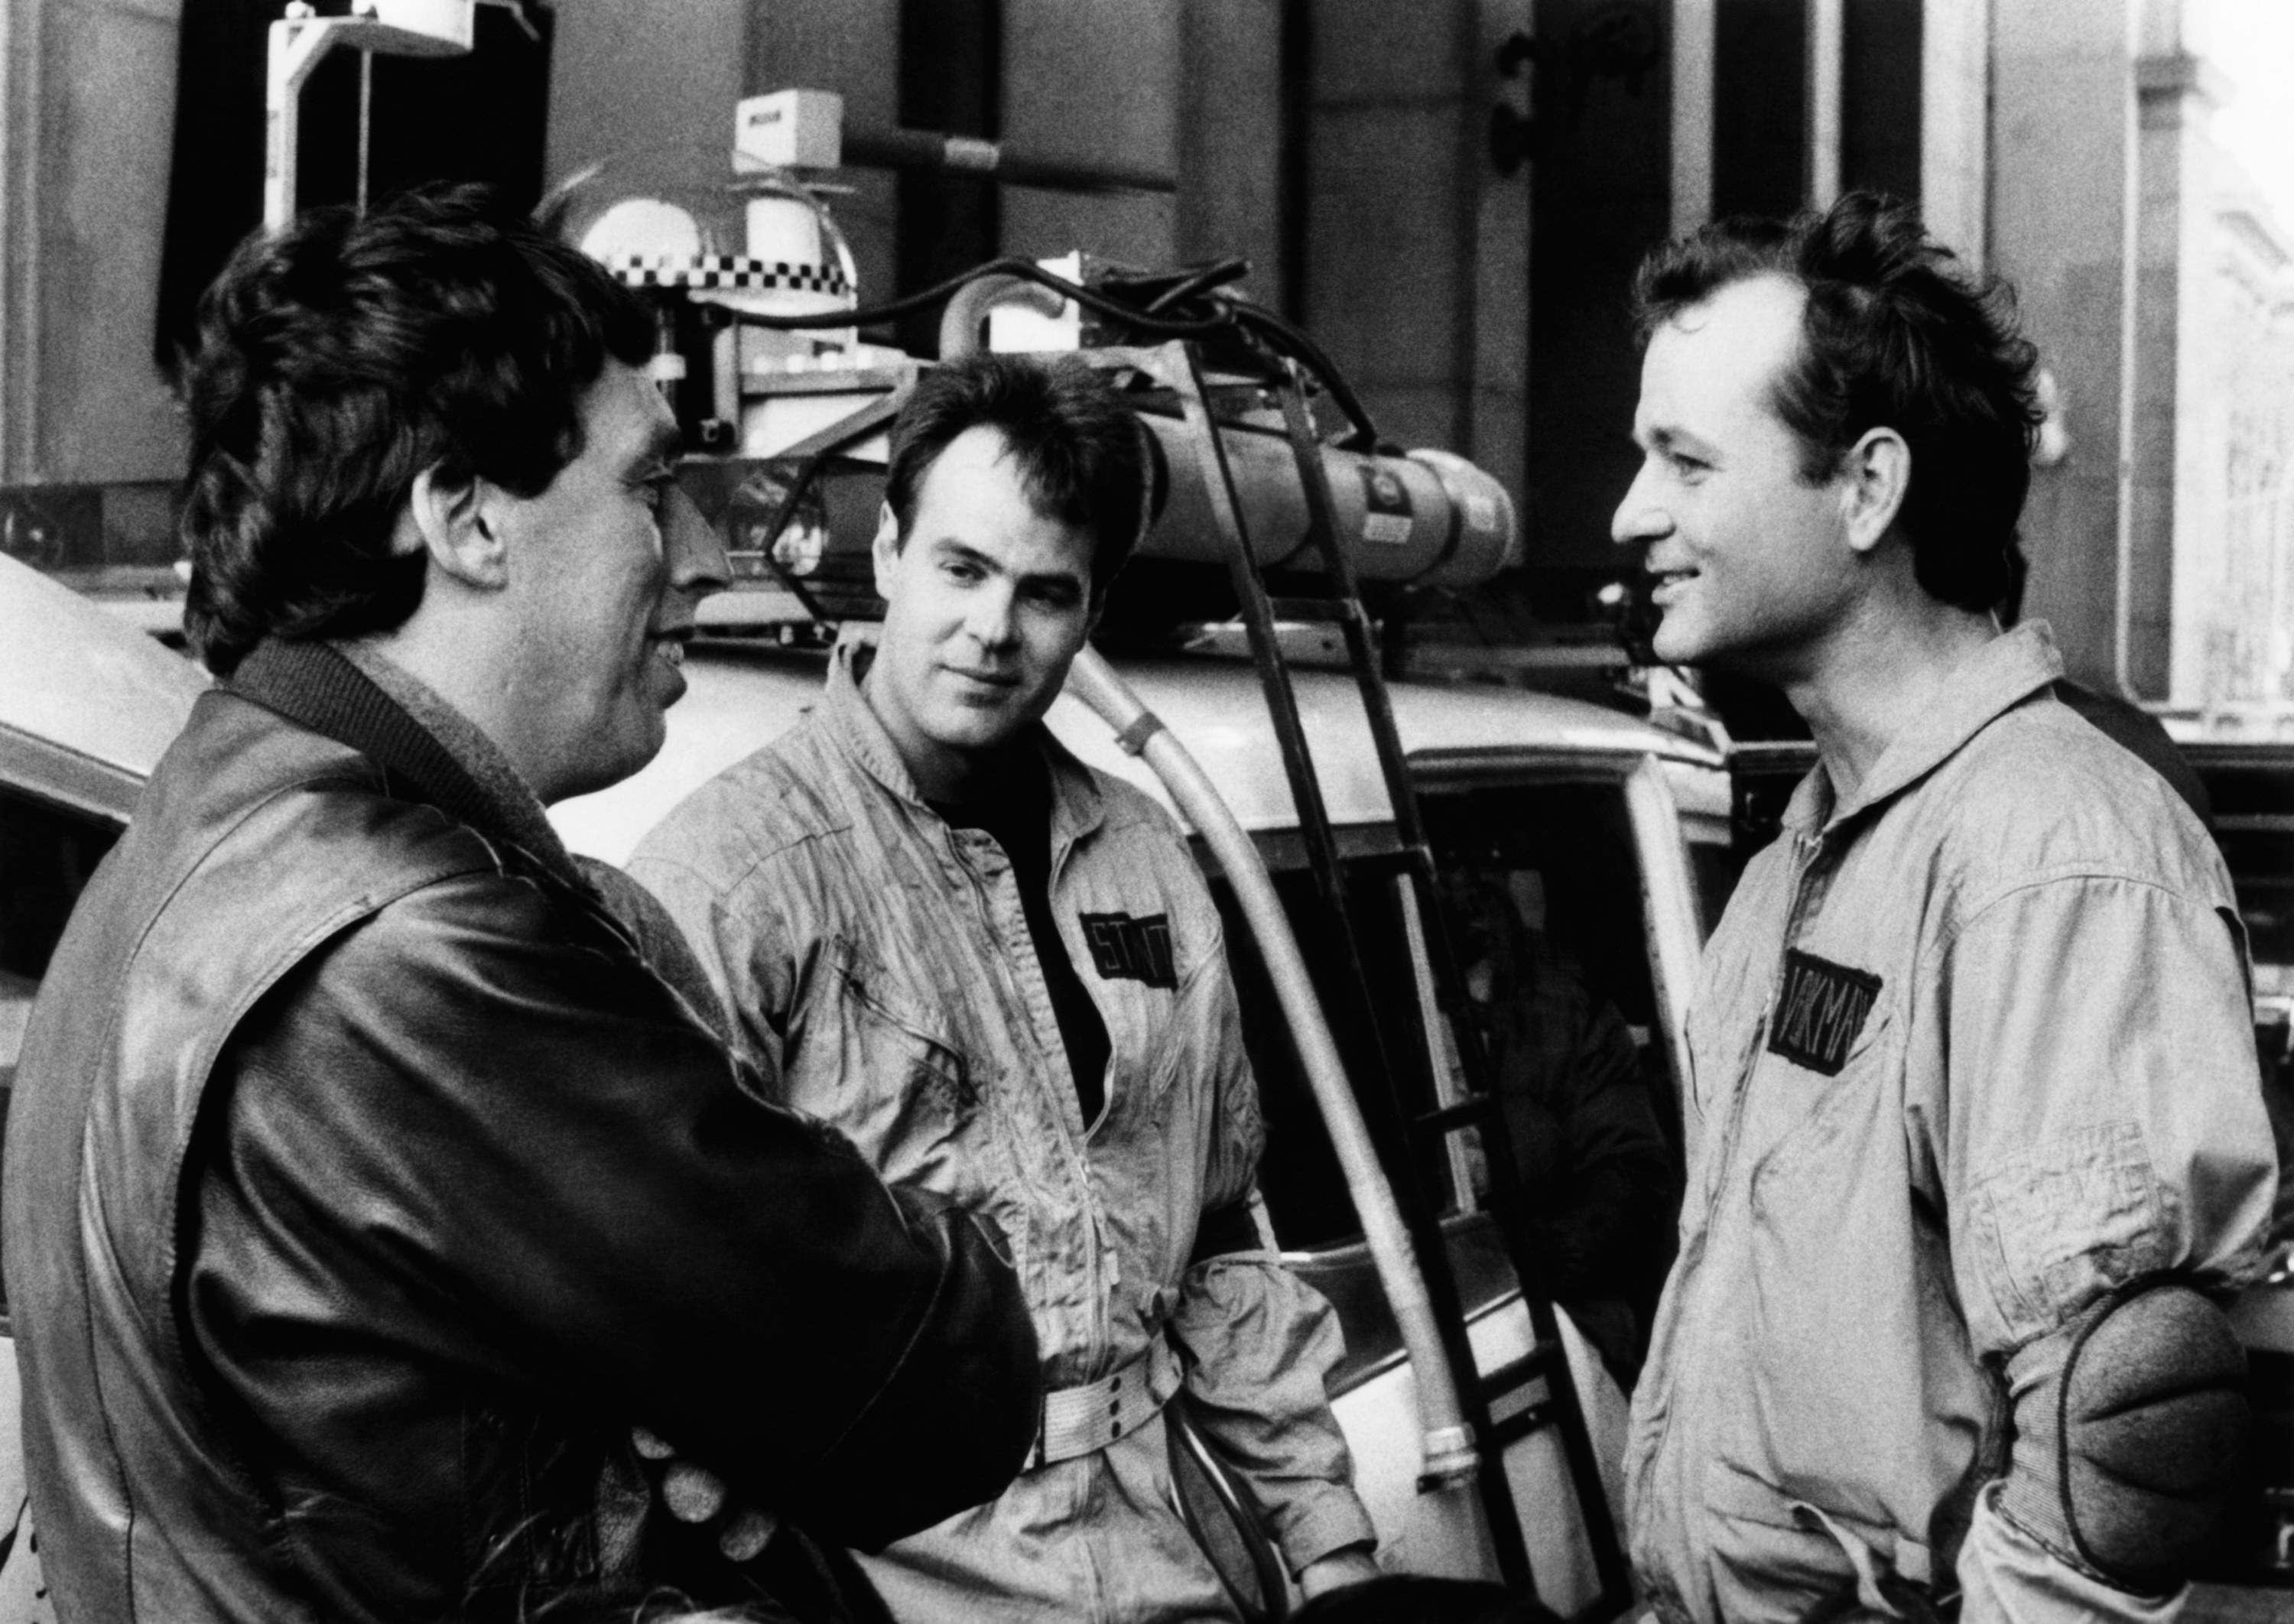 (L-R): Ivan Reitman, Dan Aykroyd and Bill Murray on the set of &quot;Ghostbusters&quot;